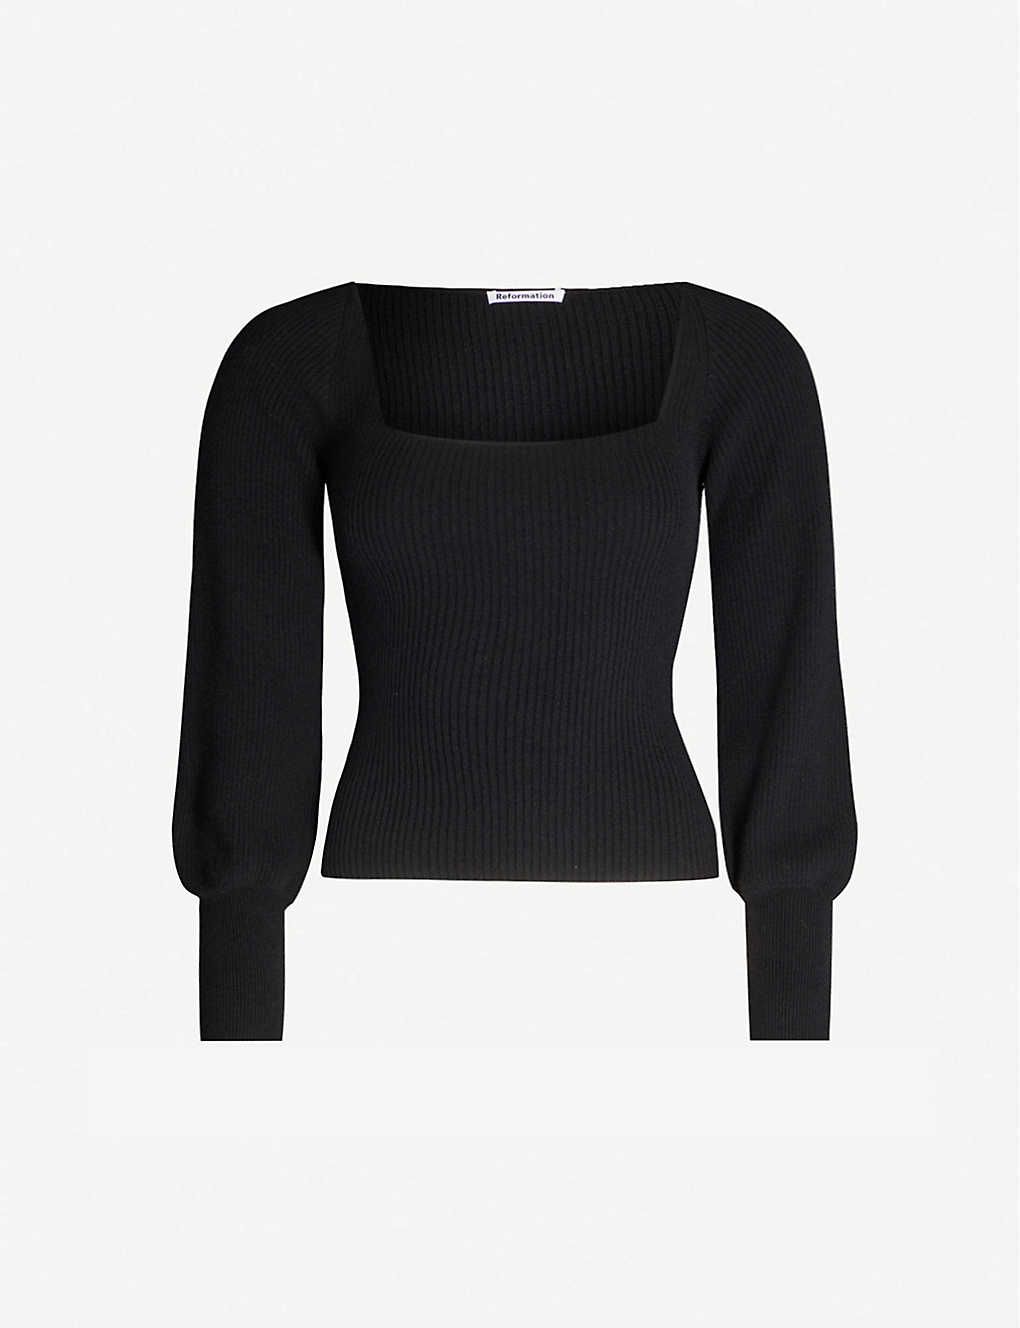 Isabel recycled wool and cashmere-blend jumper | Selfridges